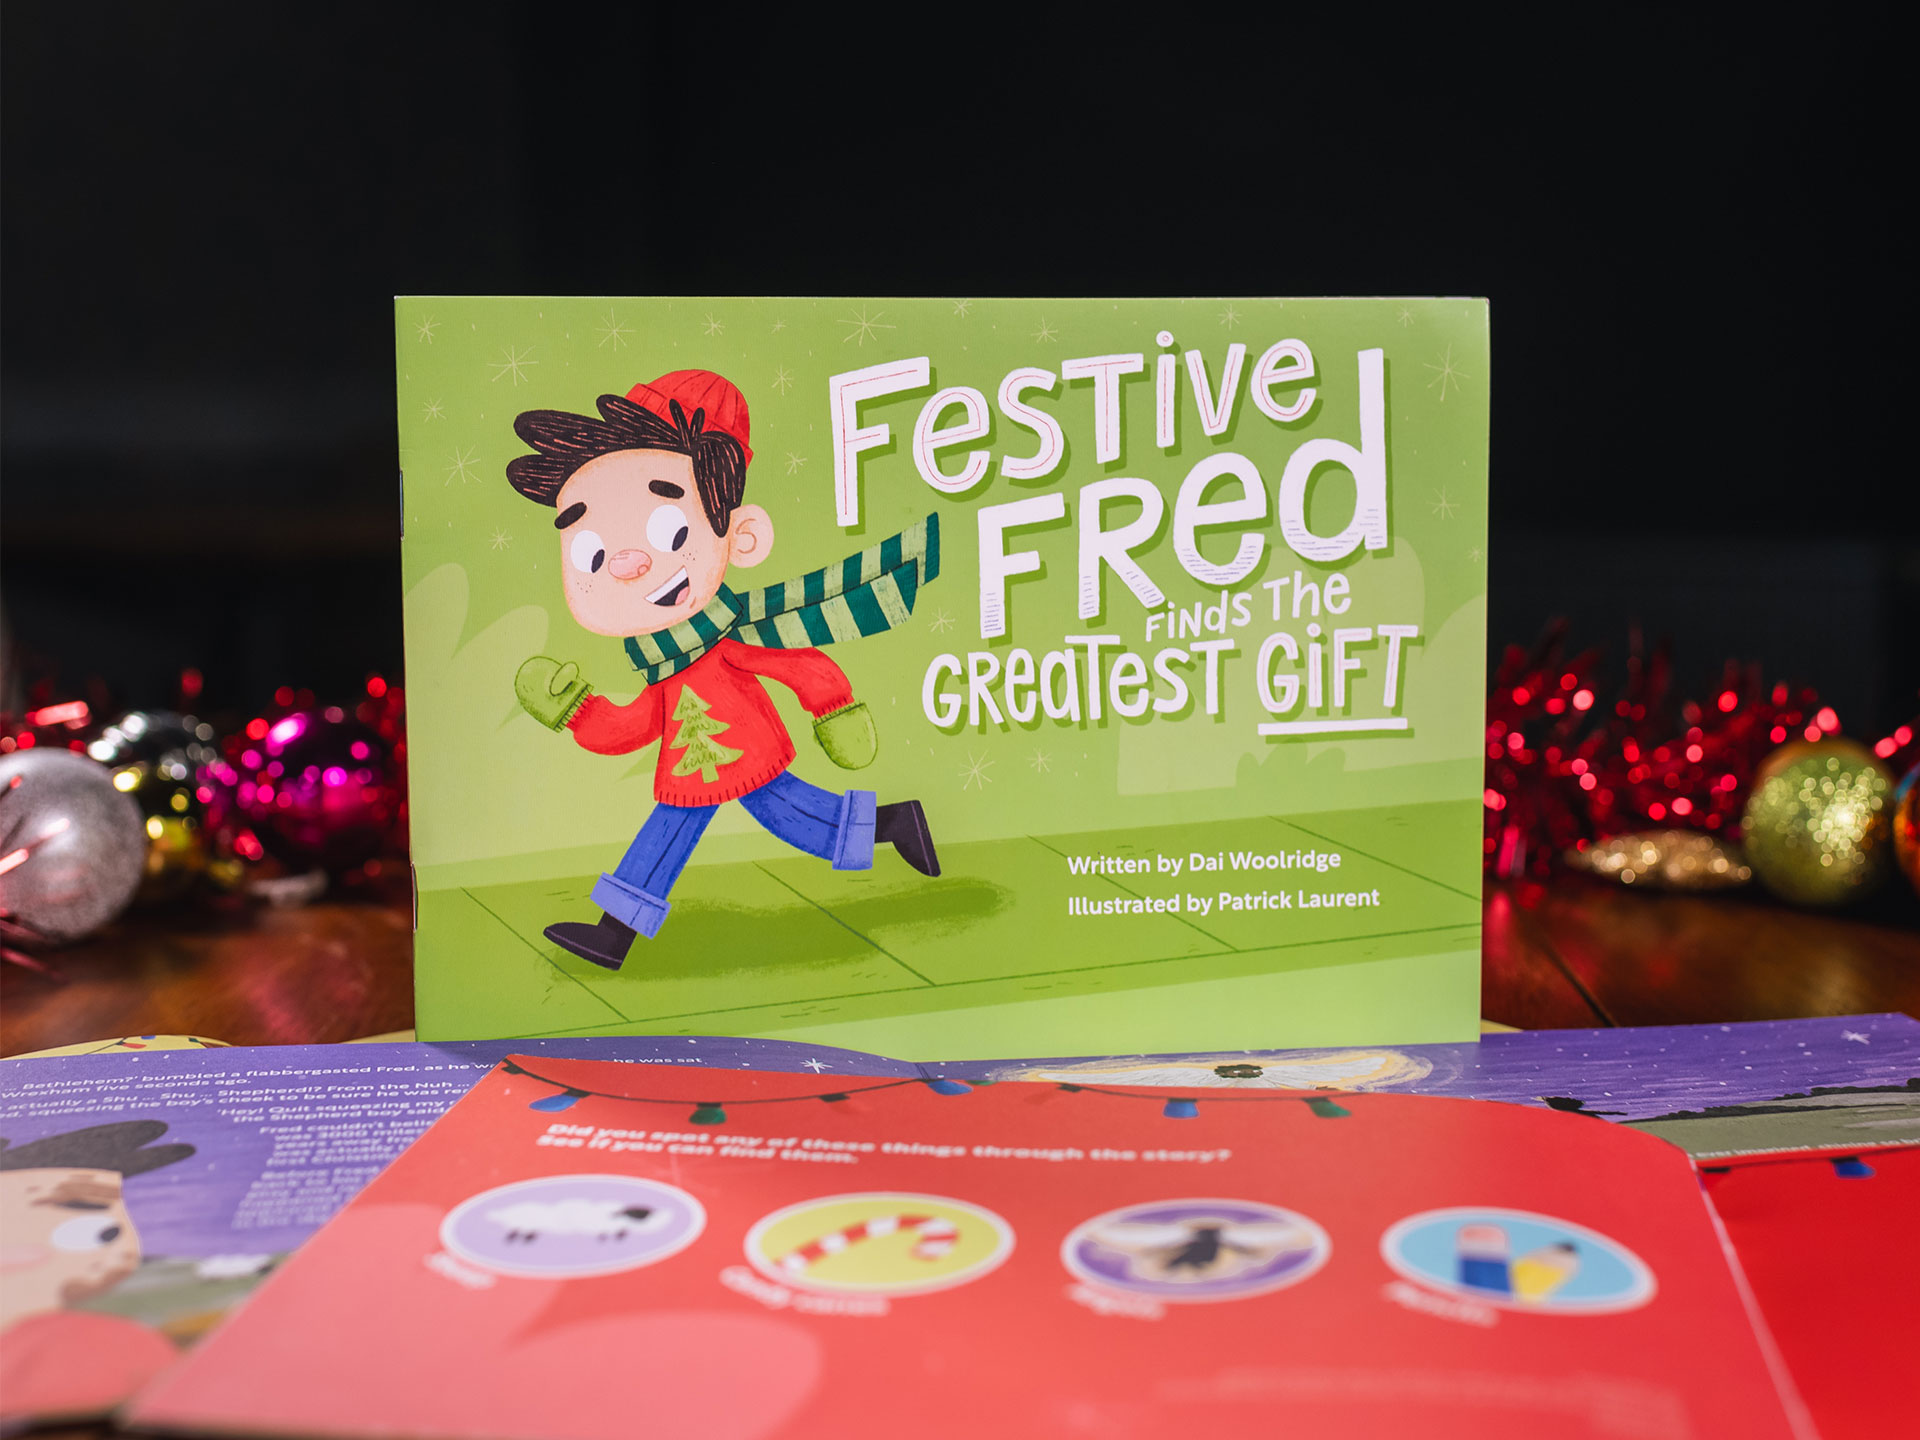 Festive Fred Finds the Greatest Gift